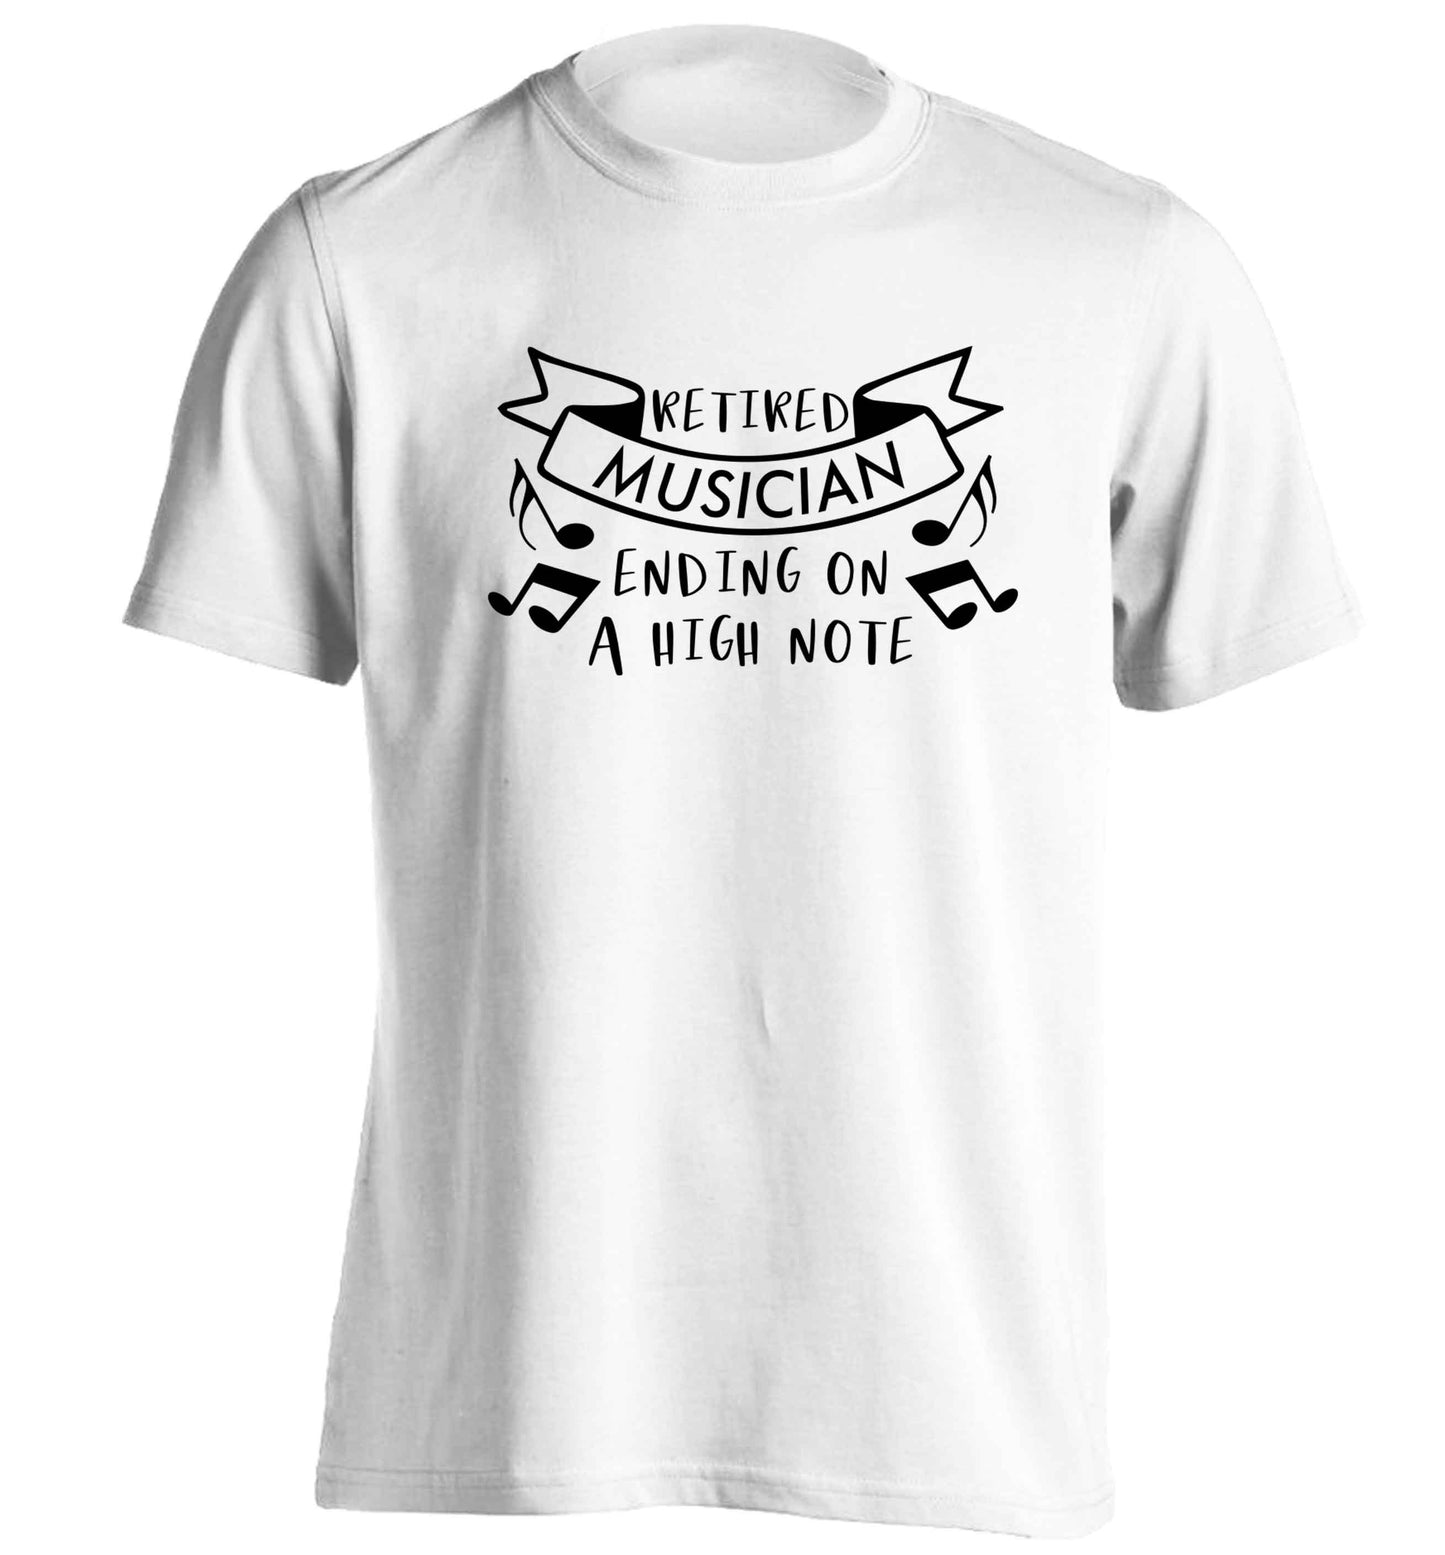 Retired musician ending on a high note adults unisex white Tshirt 2XL